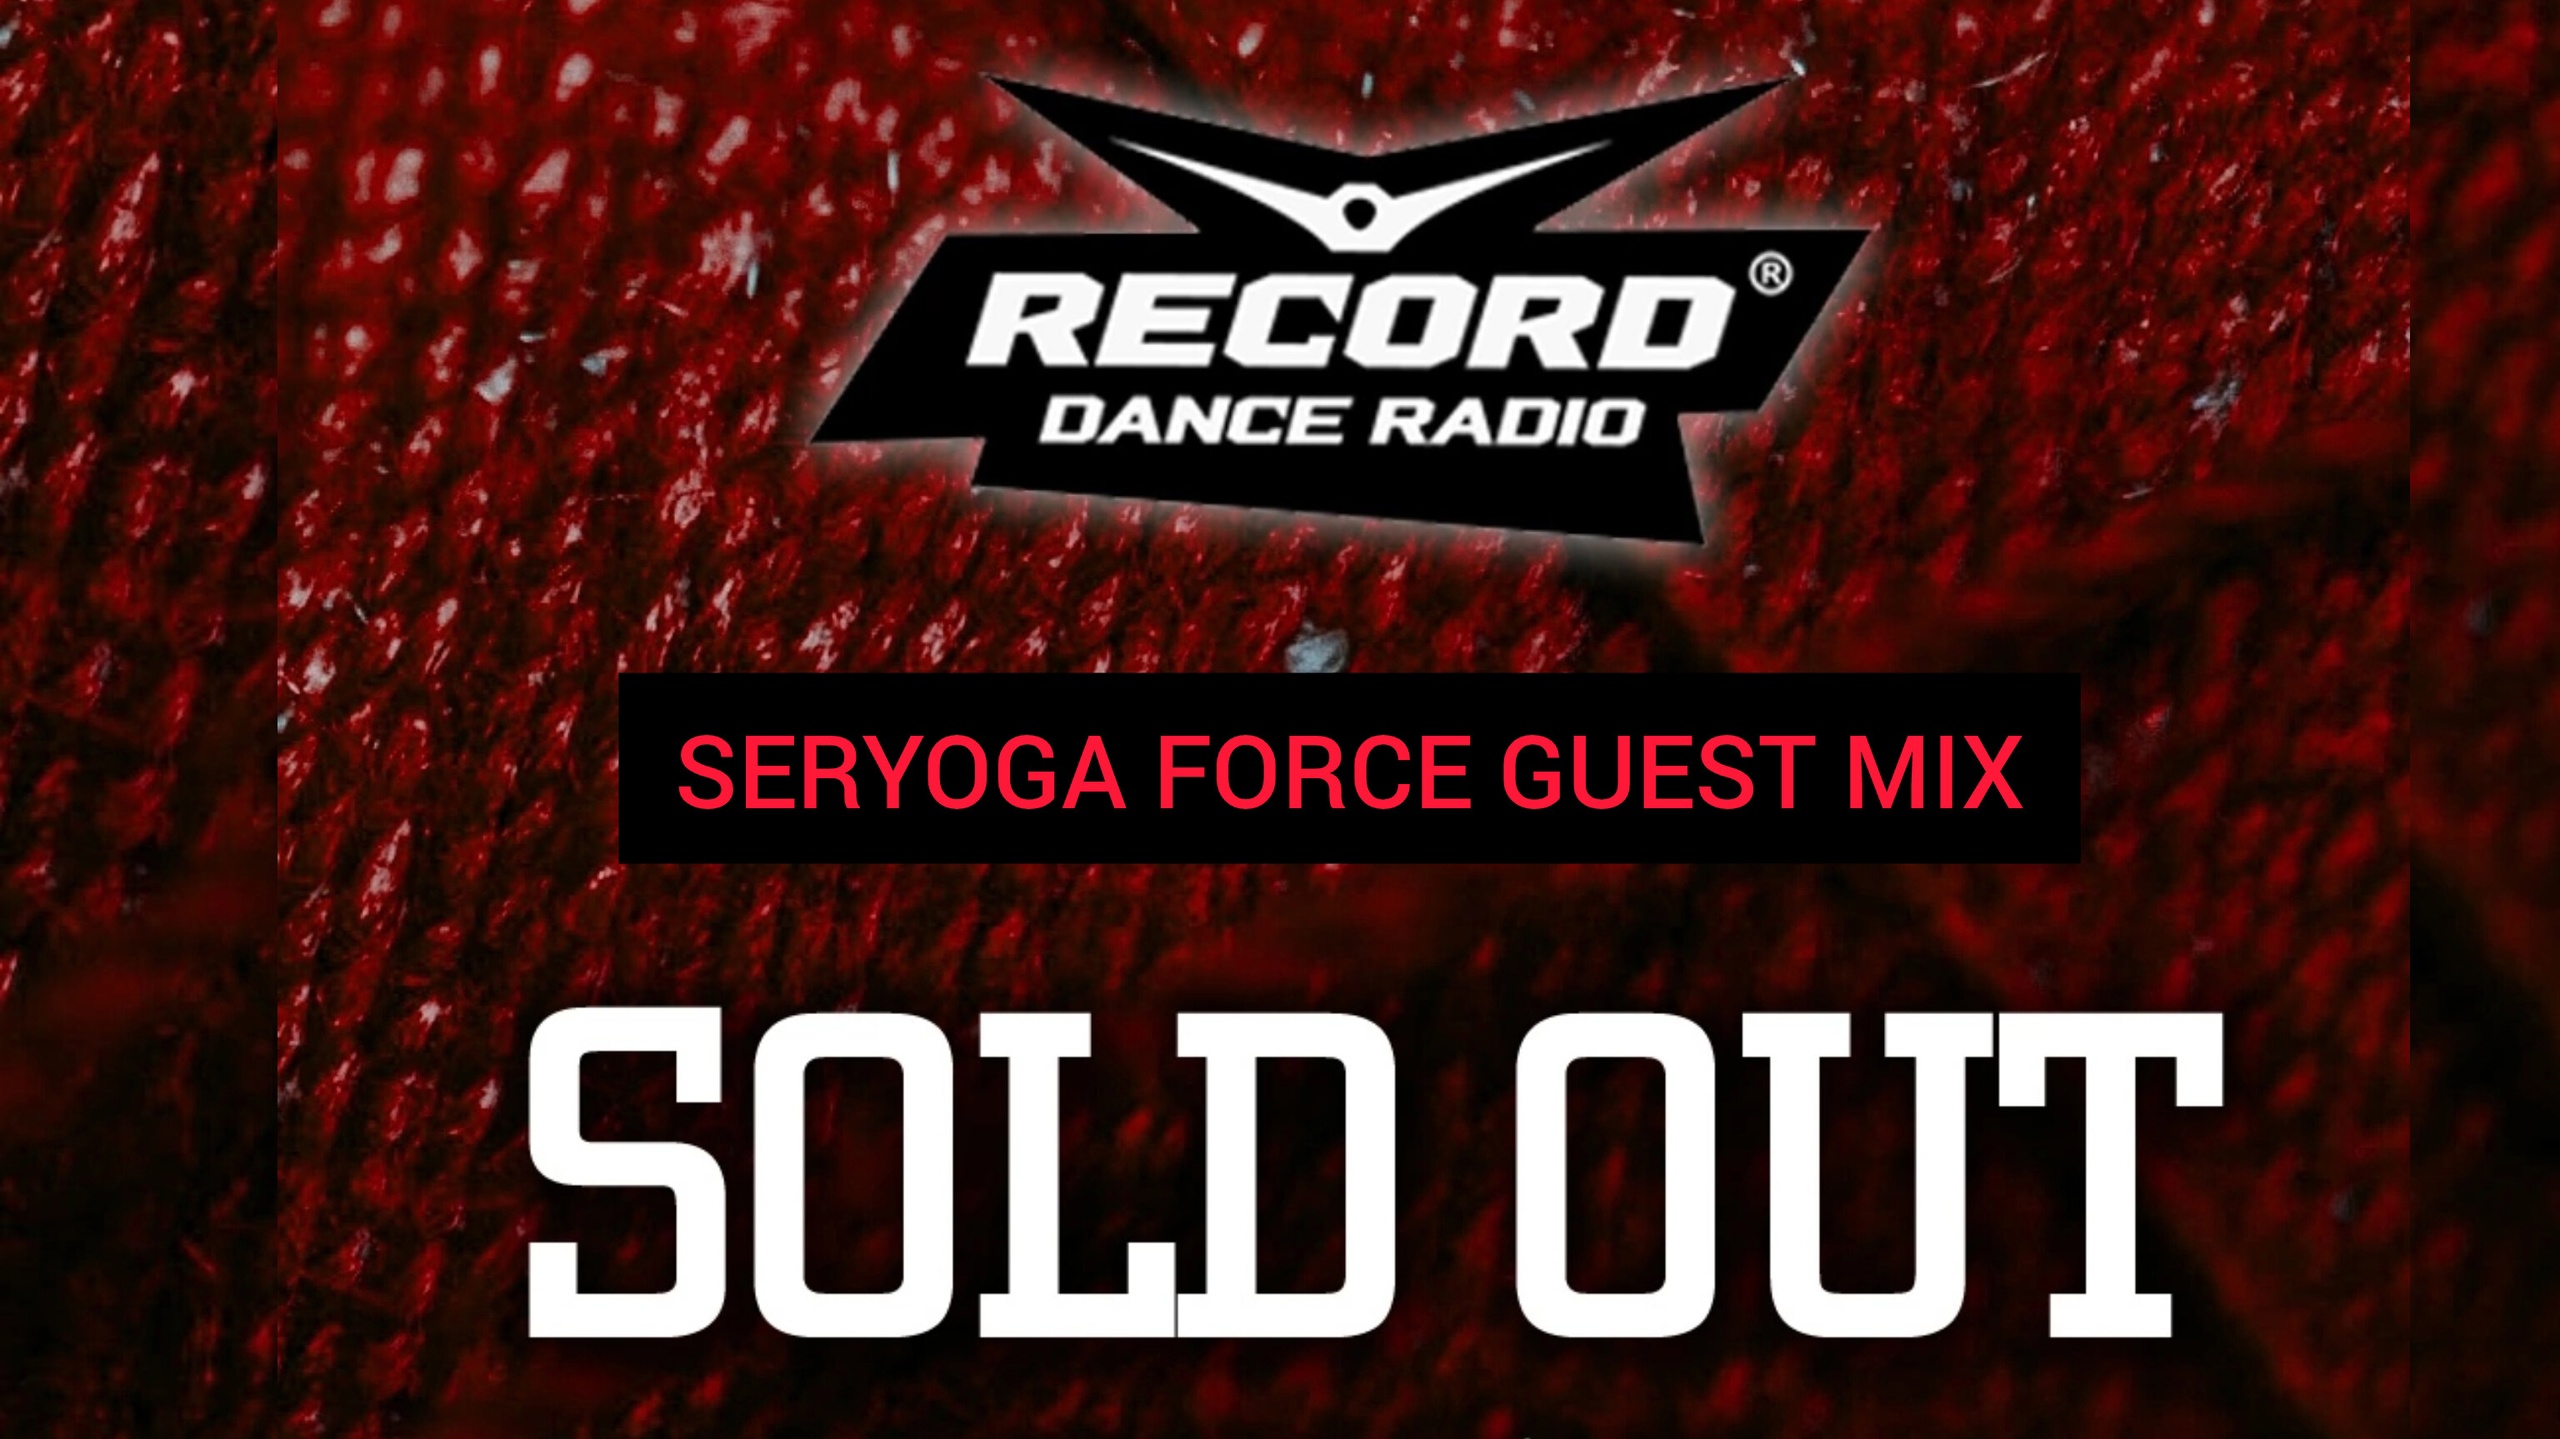 Oblomov – Record Sold Out #259 (Seryoga Force guest mix) [Радио Рекорд]